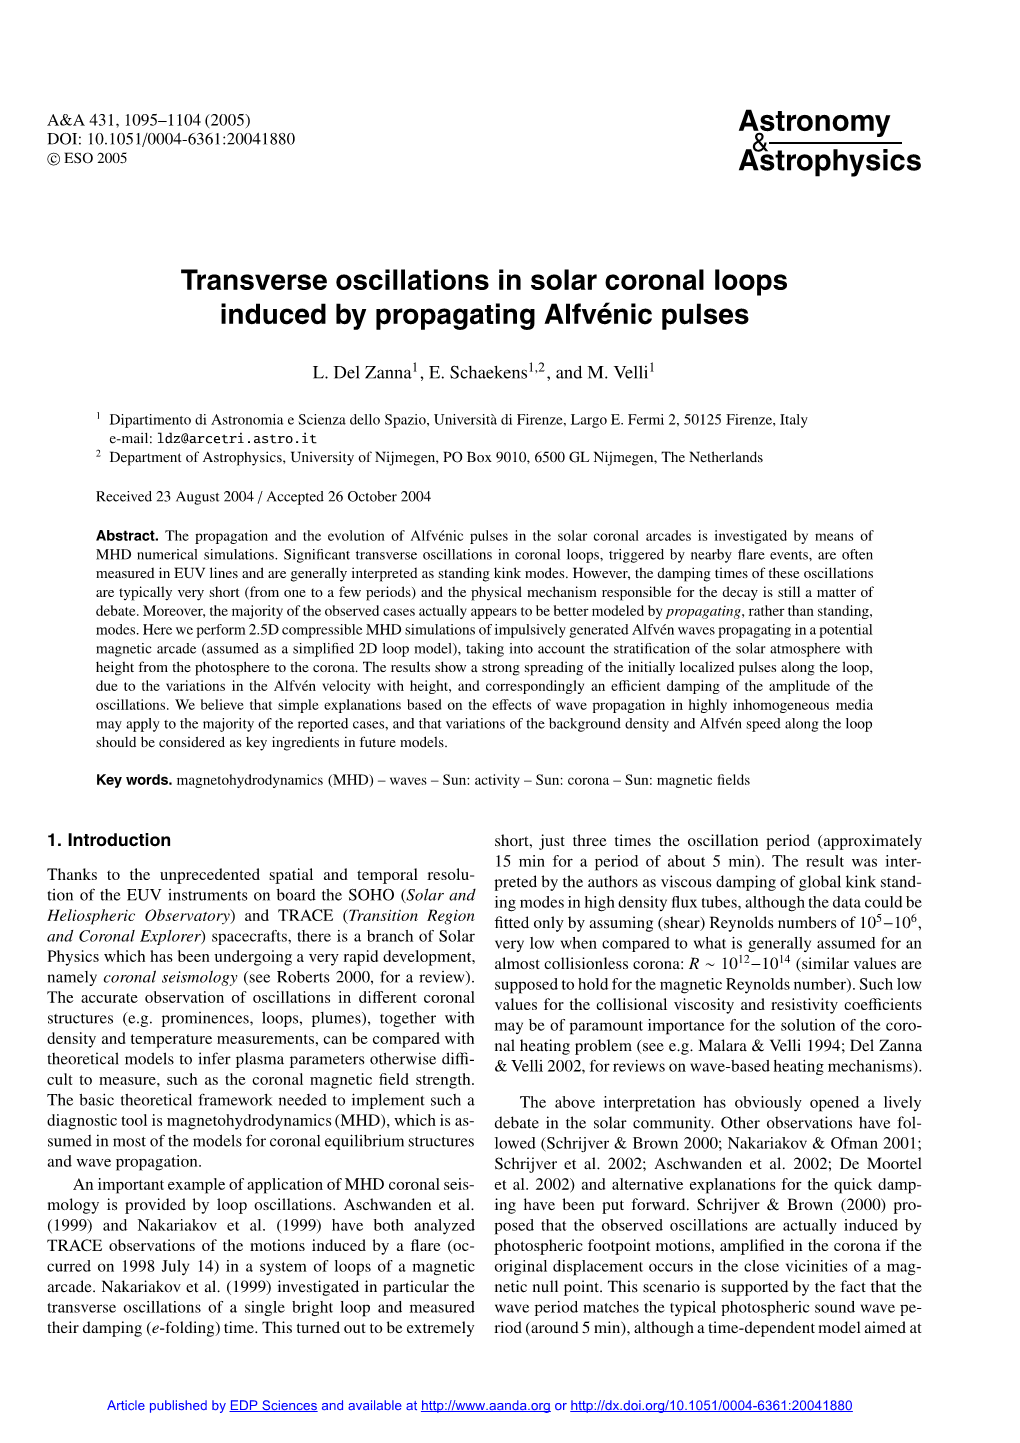 Transverse Oscillations in Solar Coronal Loops Induced by Propagating Alfvénic Pulses